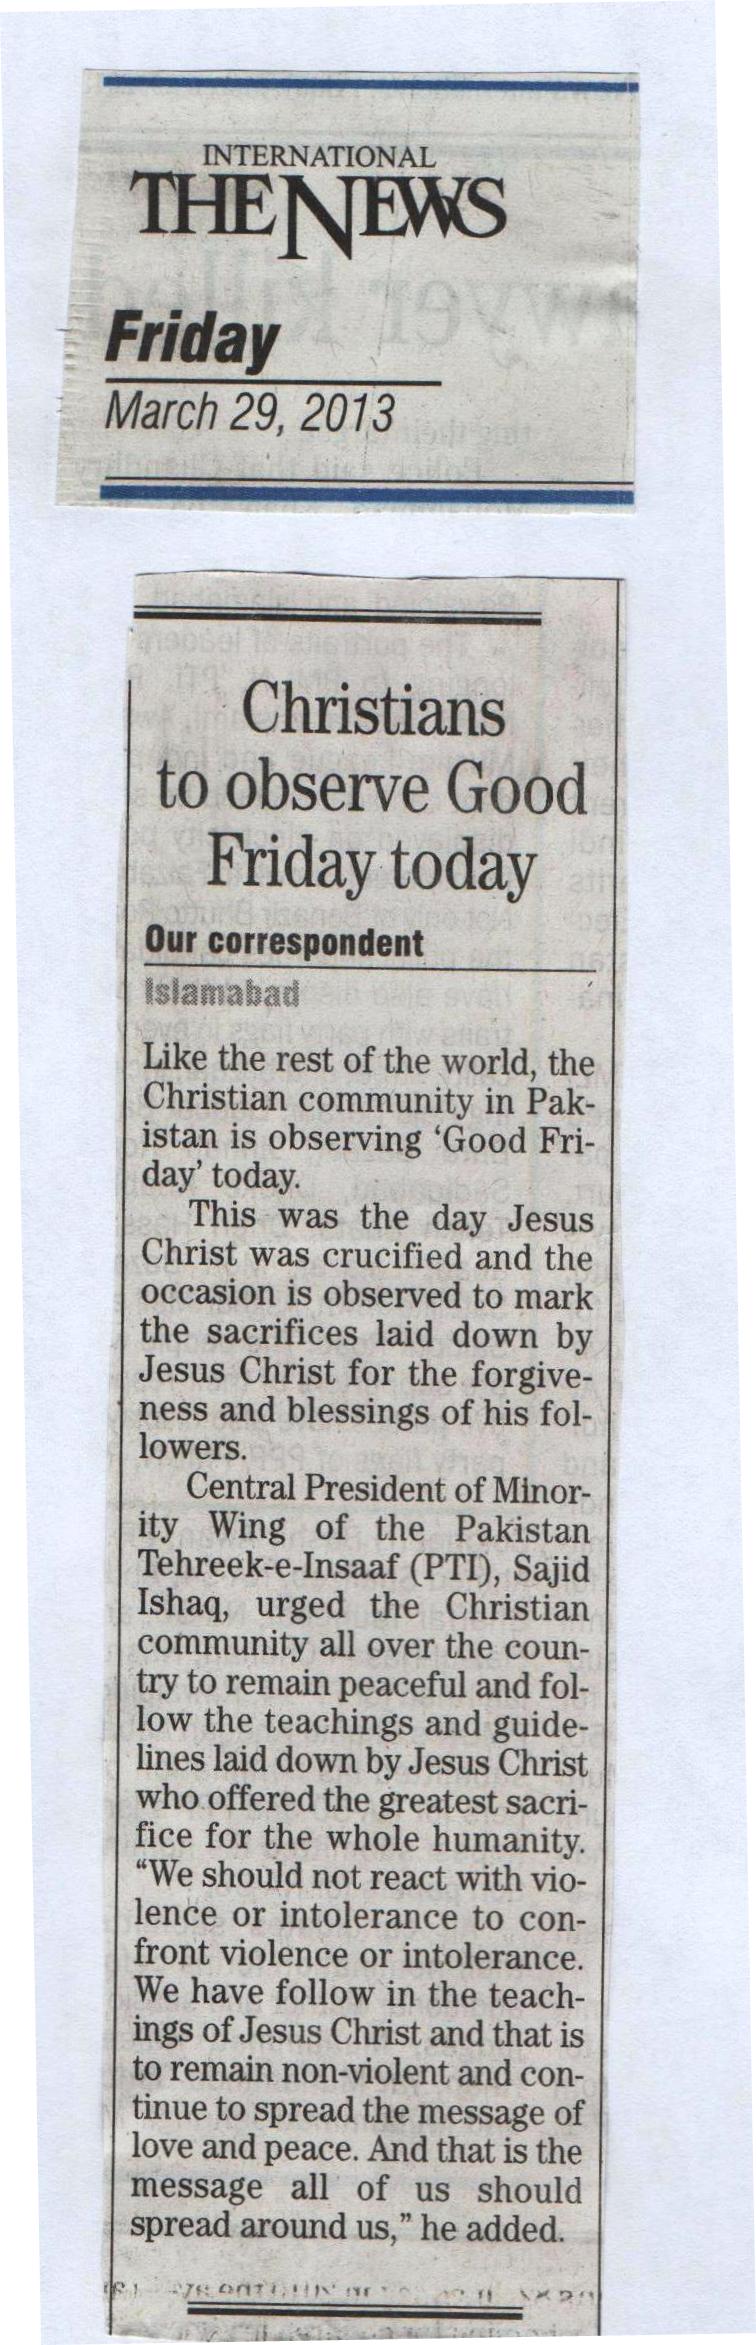 Christians to observe Good Friday today